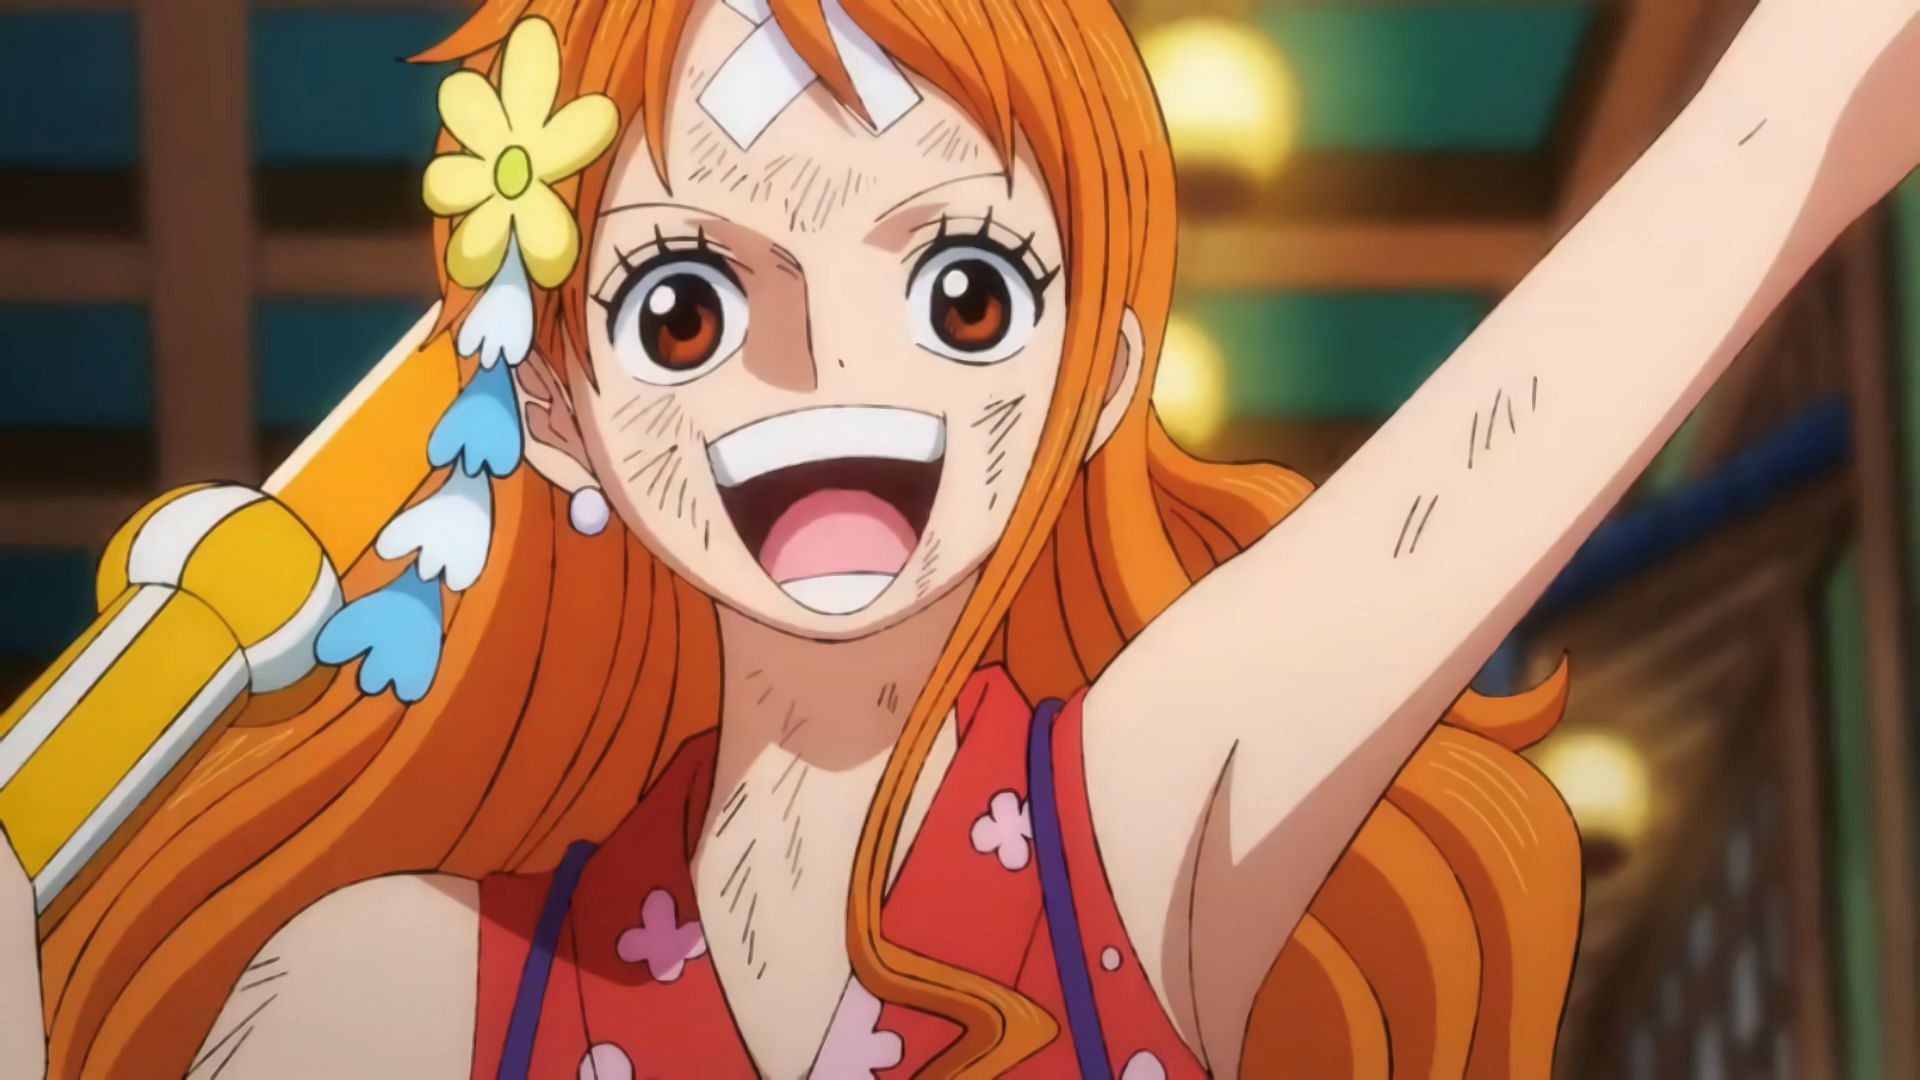 Nami as seen in One Piece episode 1032 (Image via Toei Animation)